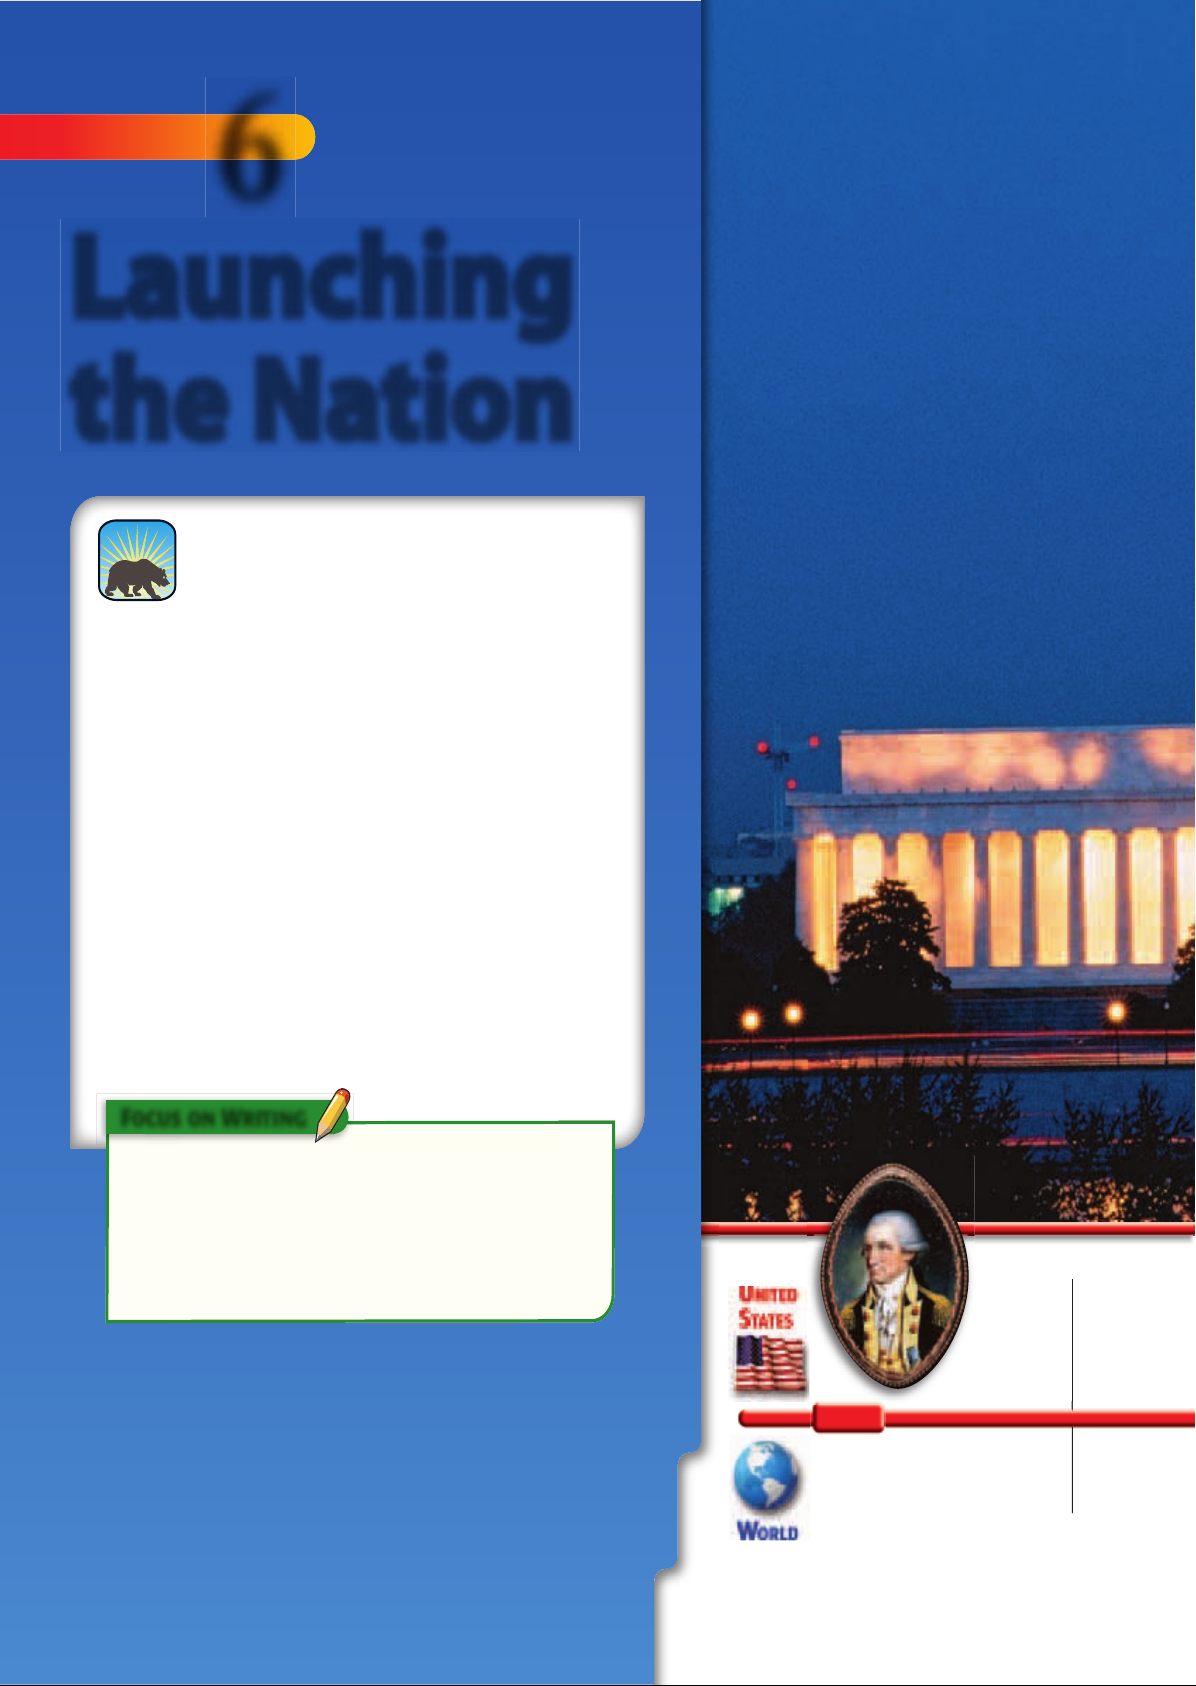 US_History_Textbook_8th_Grade_Chapter_6_Launching_the_Nation_bQLeyRX PDF